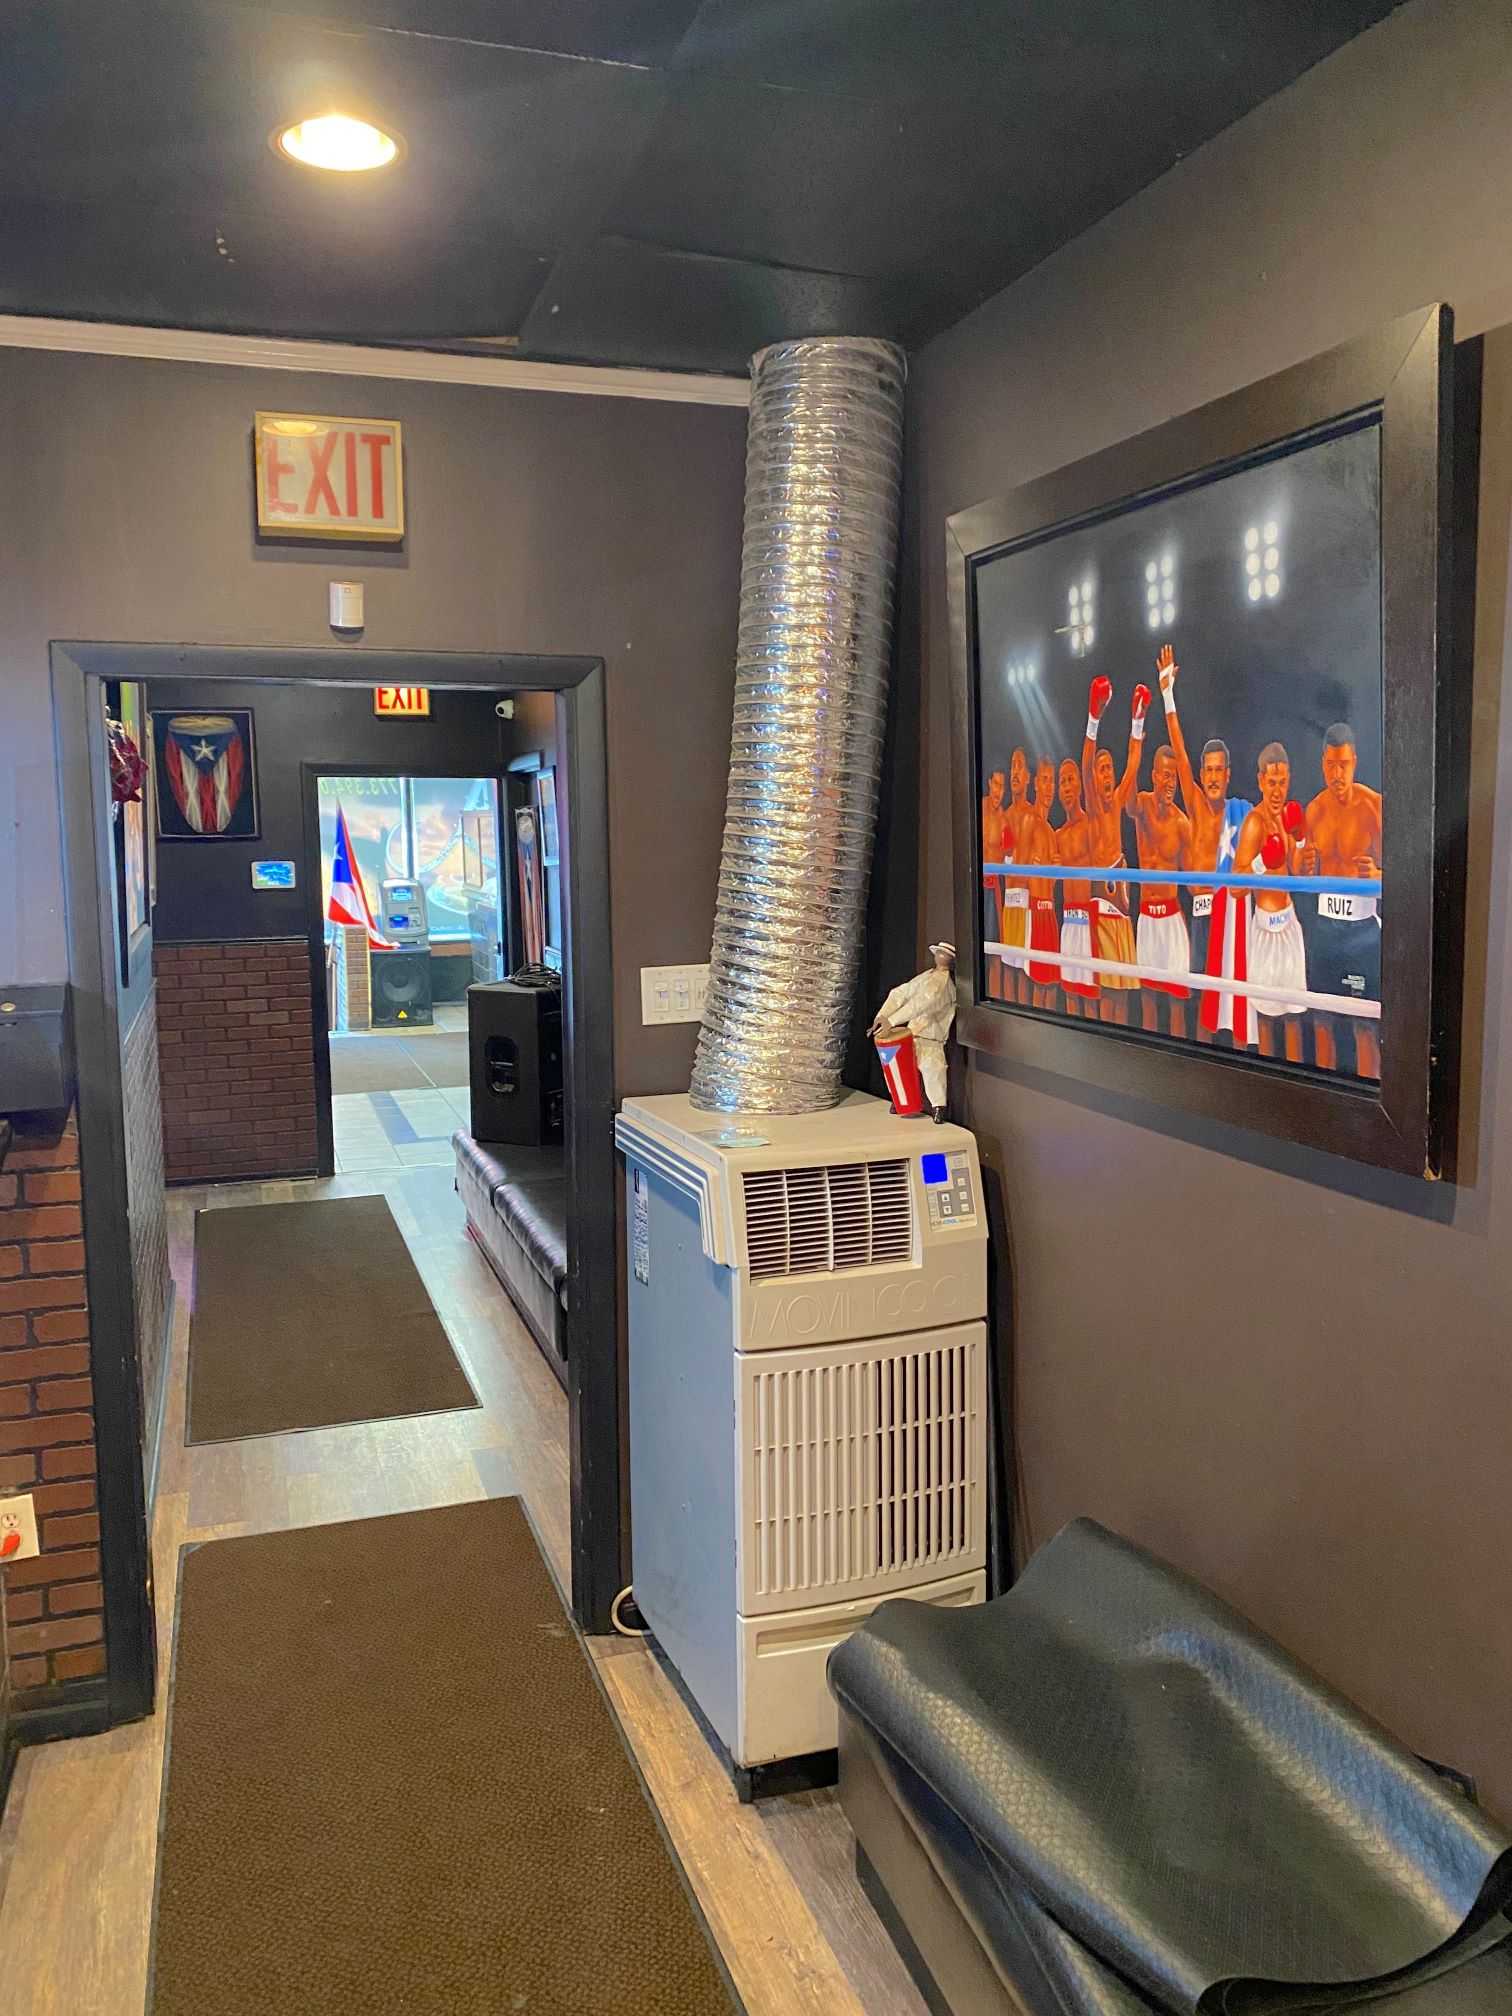 Portable AC in restaurant dining area providing additional cooling. 